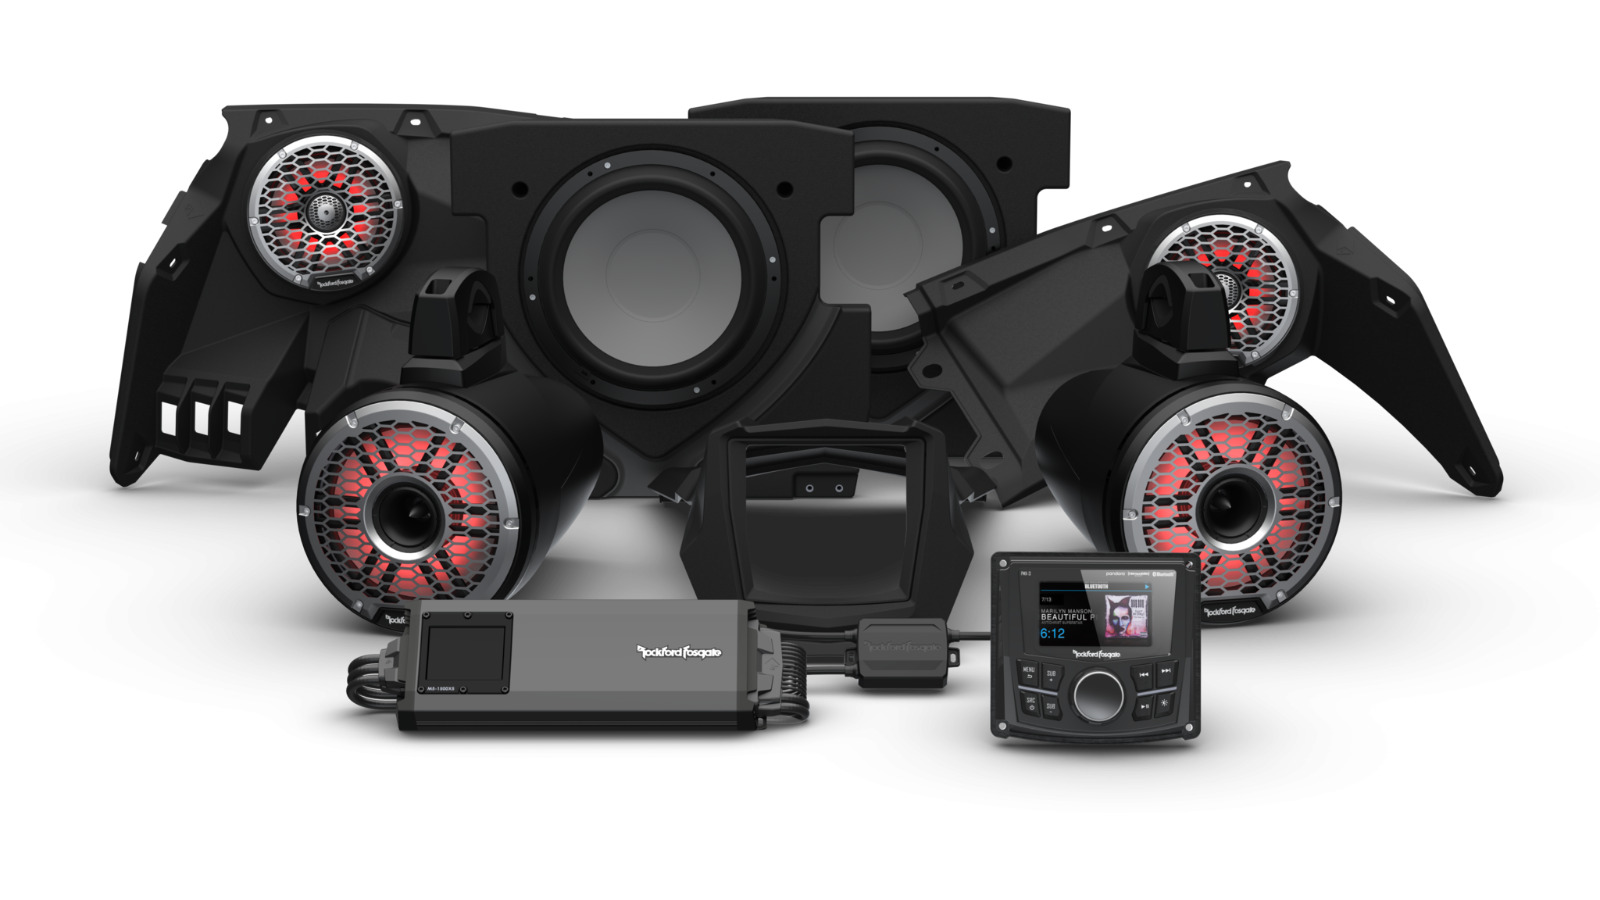 Rockford Fosgate X317-STG6 Stereo, Front + Rear Speakers, Sub and 1500W Amp Kit